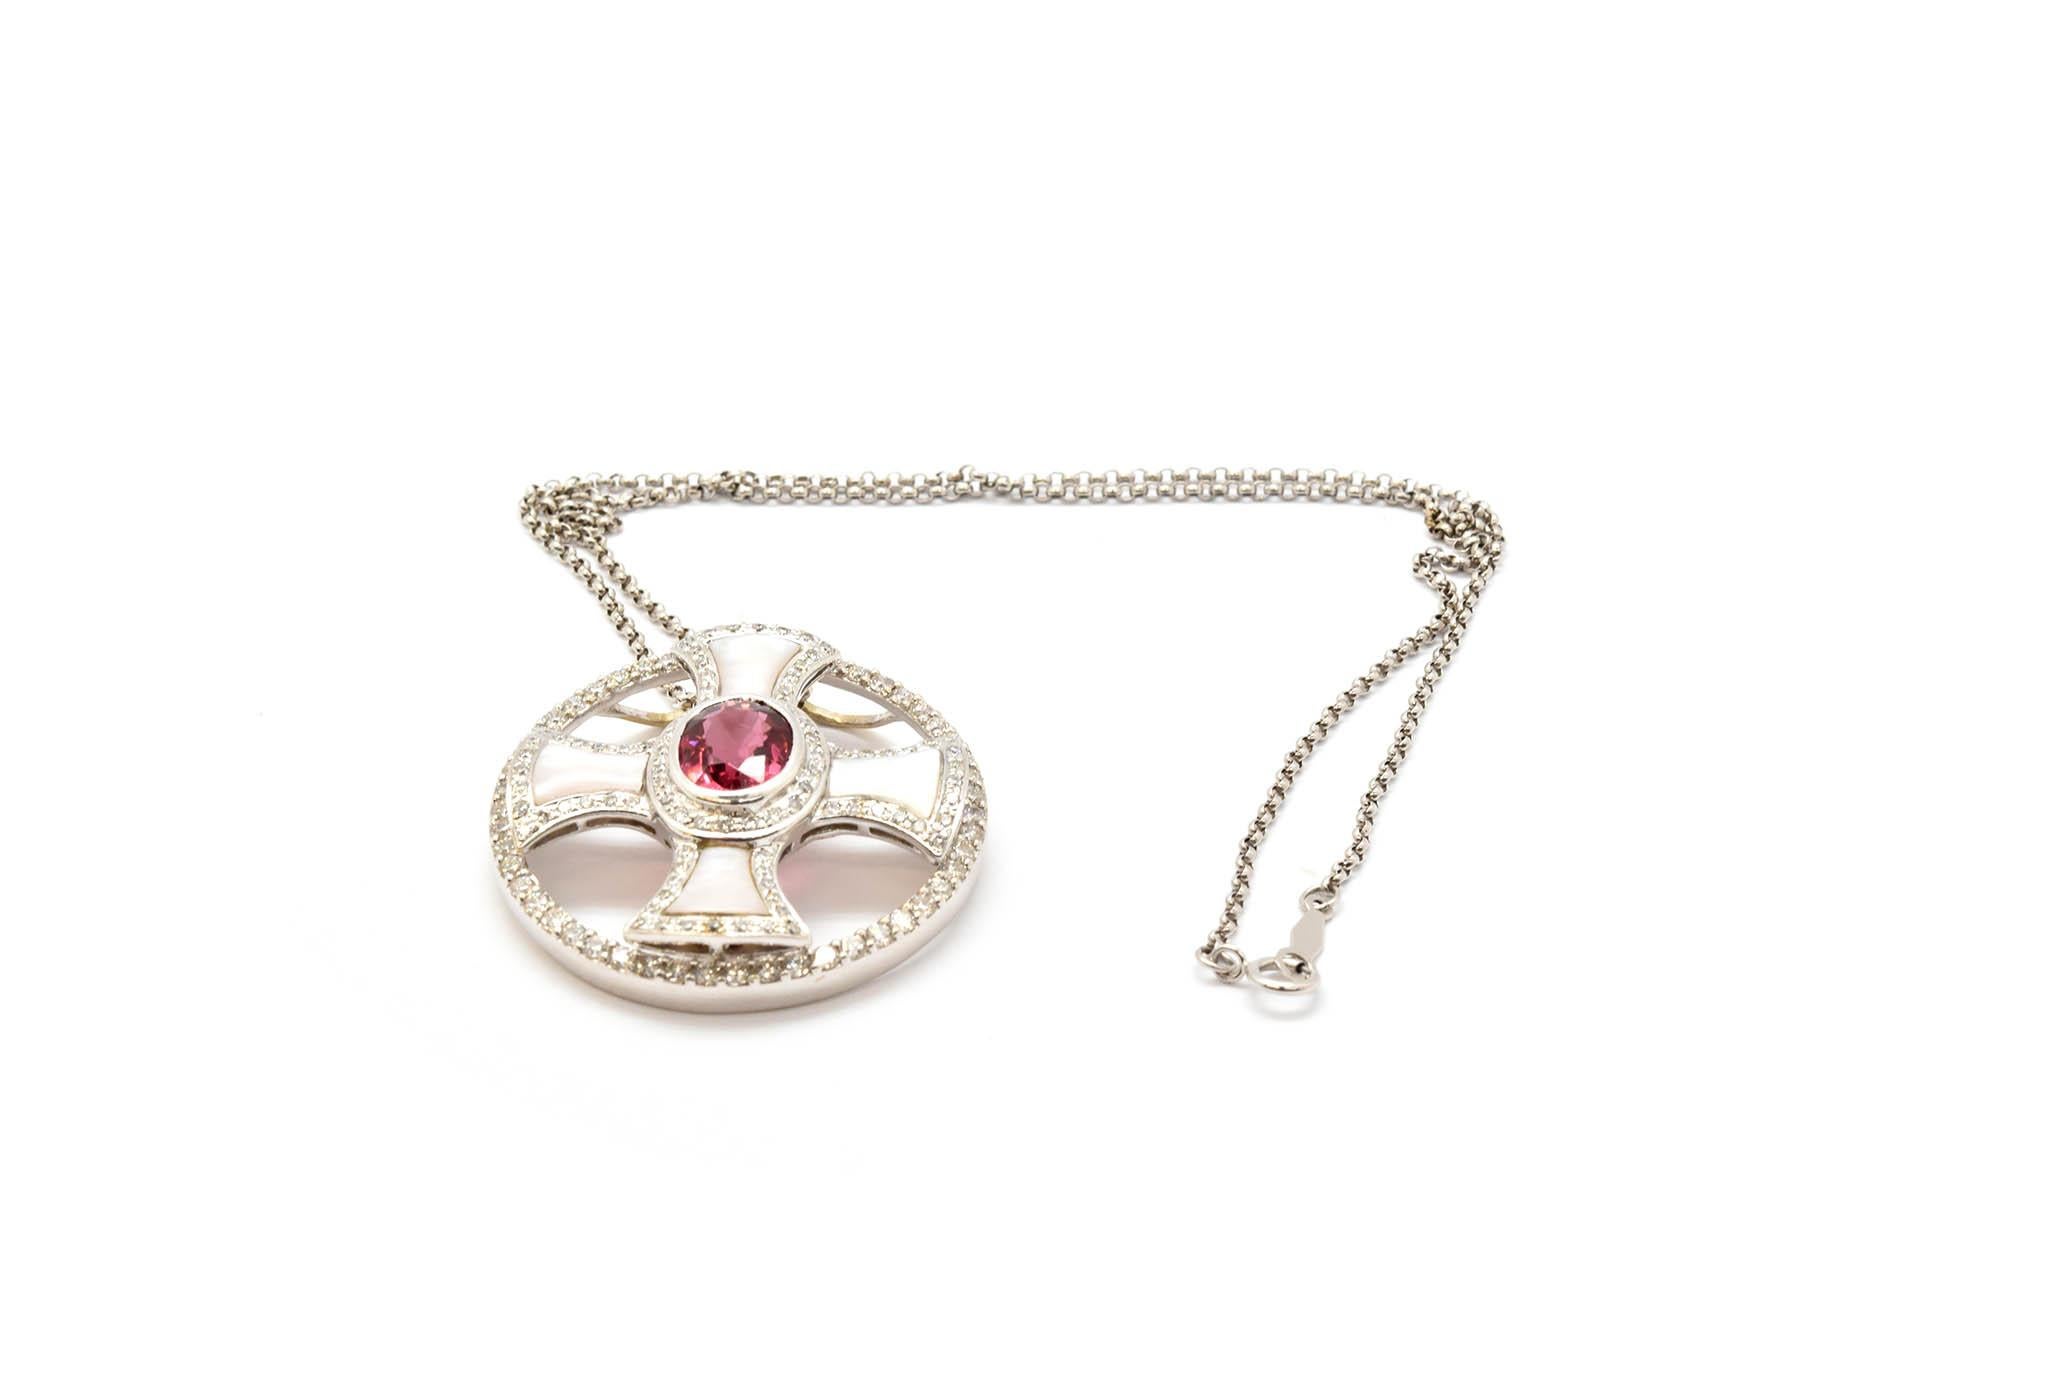 Round Cut Custom 14 Karat White Gold Diamond, Pink Tourmaline and Mother-of-Pearl Necklace For Sale